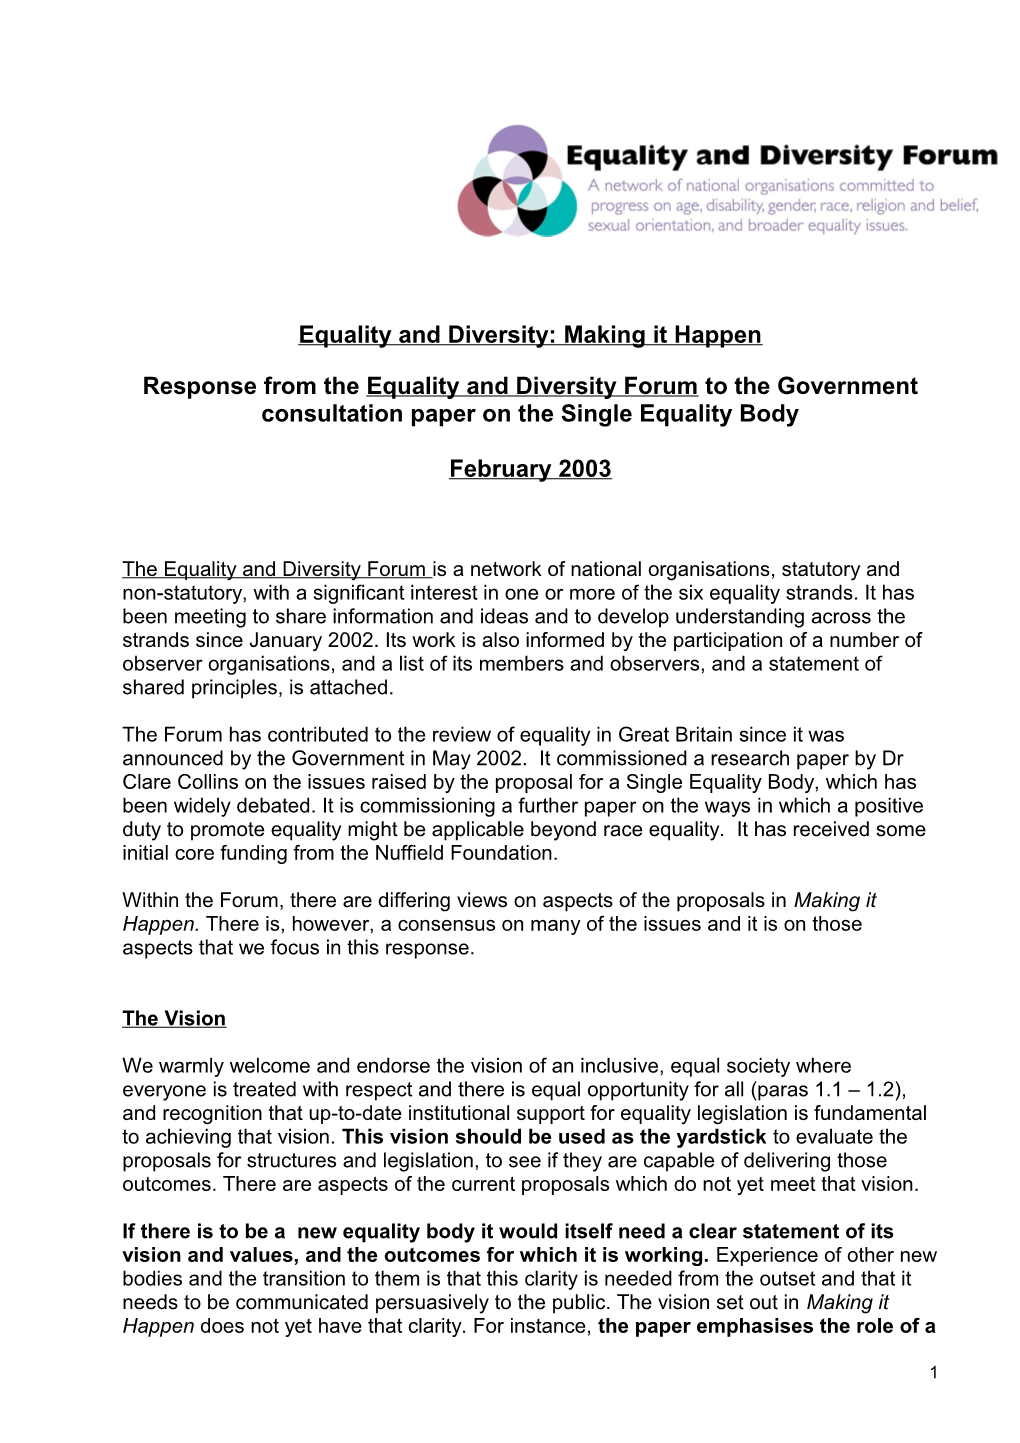 The Equality and Diversity Forum Has Been Meeting Since January 2002